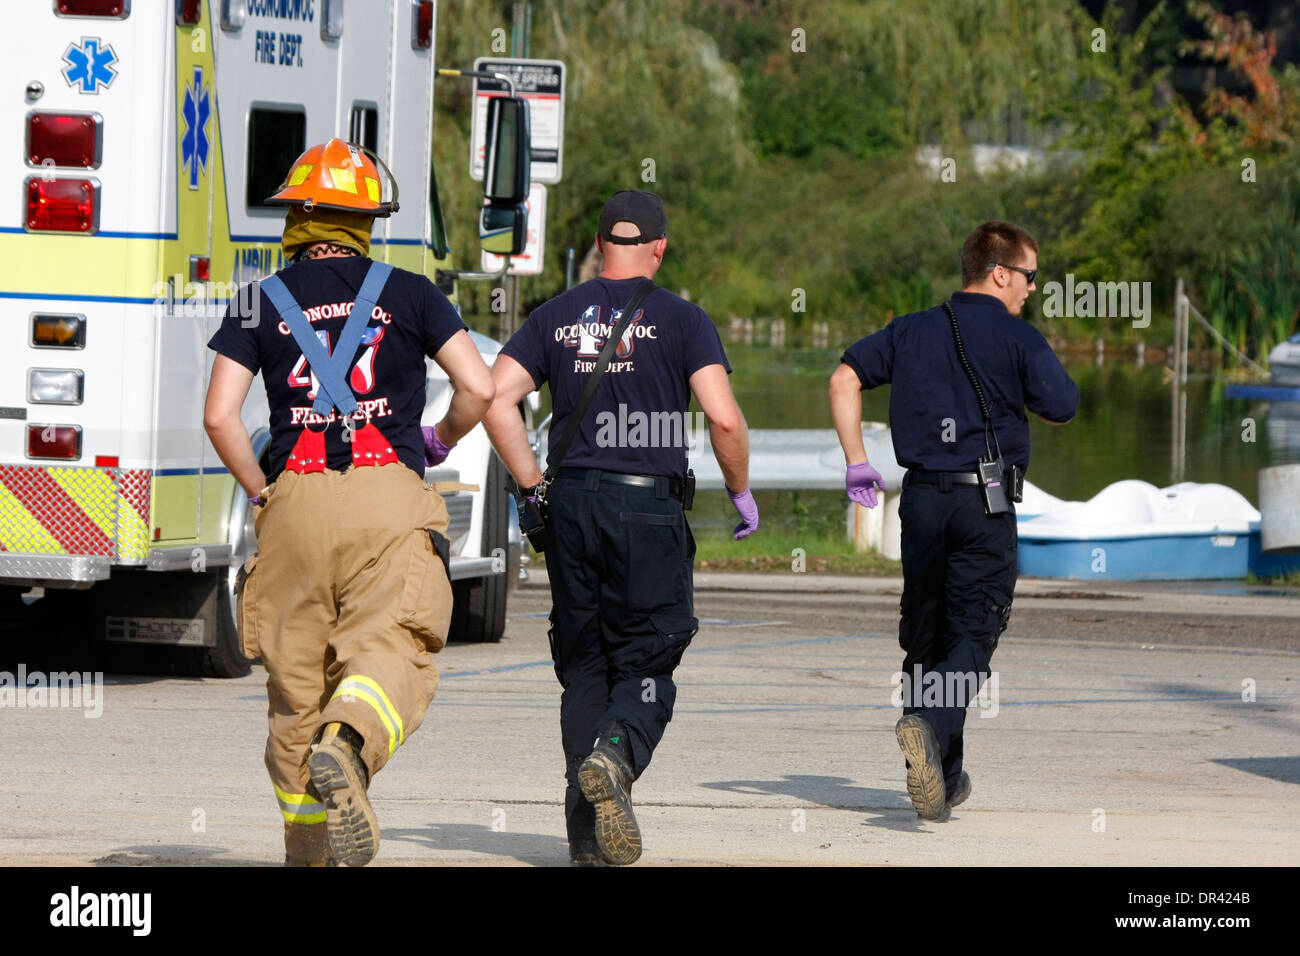 Three firefighter emts running for an emergency Stock Photo